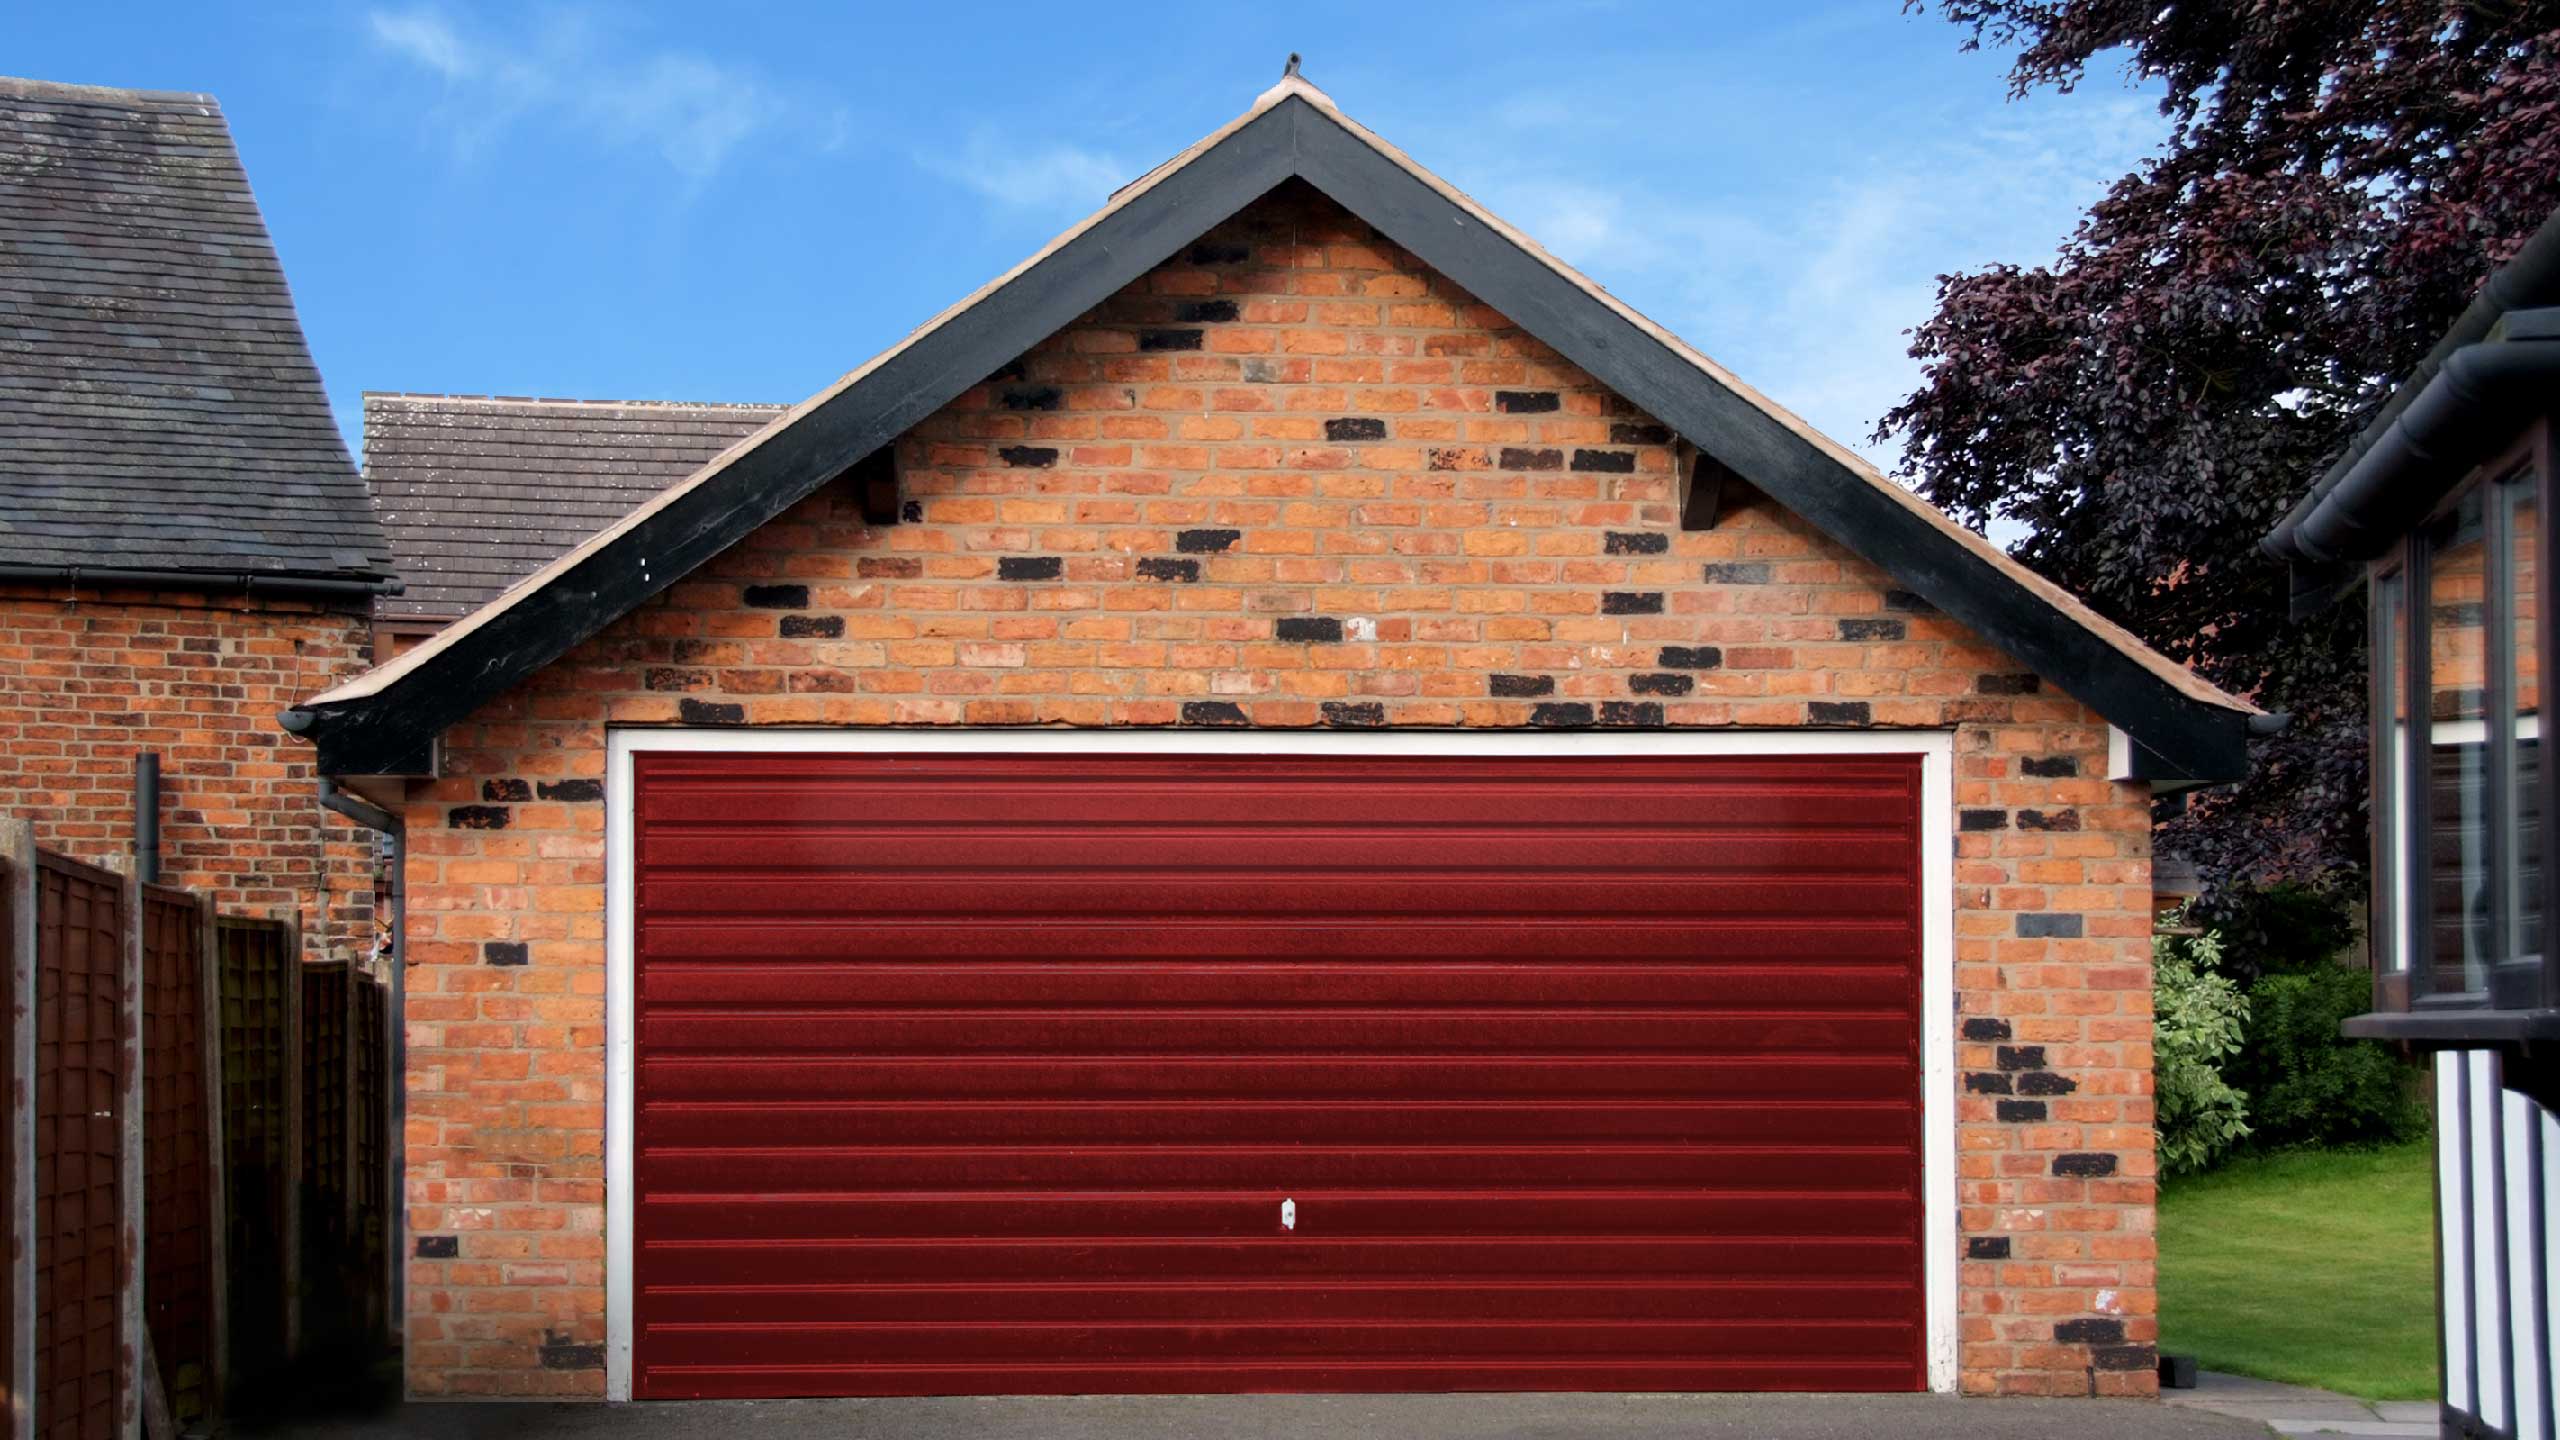 Garage Conversion Considerations Admiral, Does Converting A Detached Garage Add Value